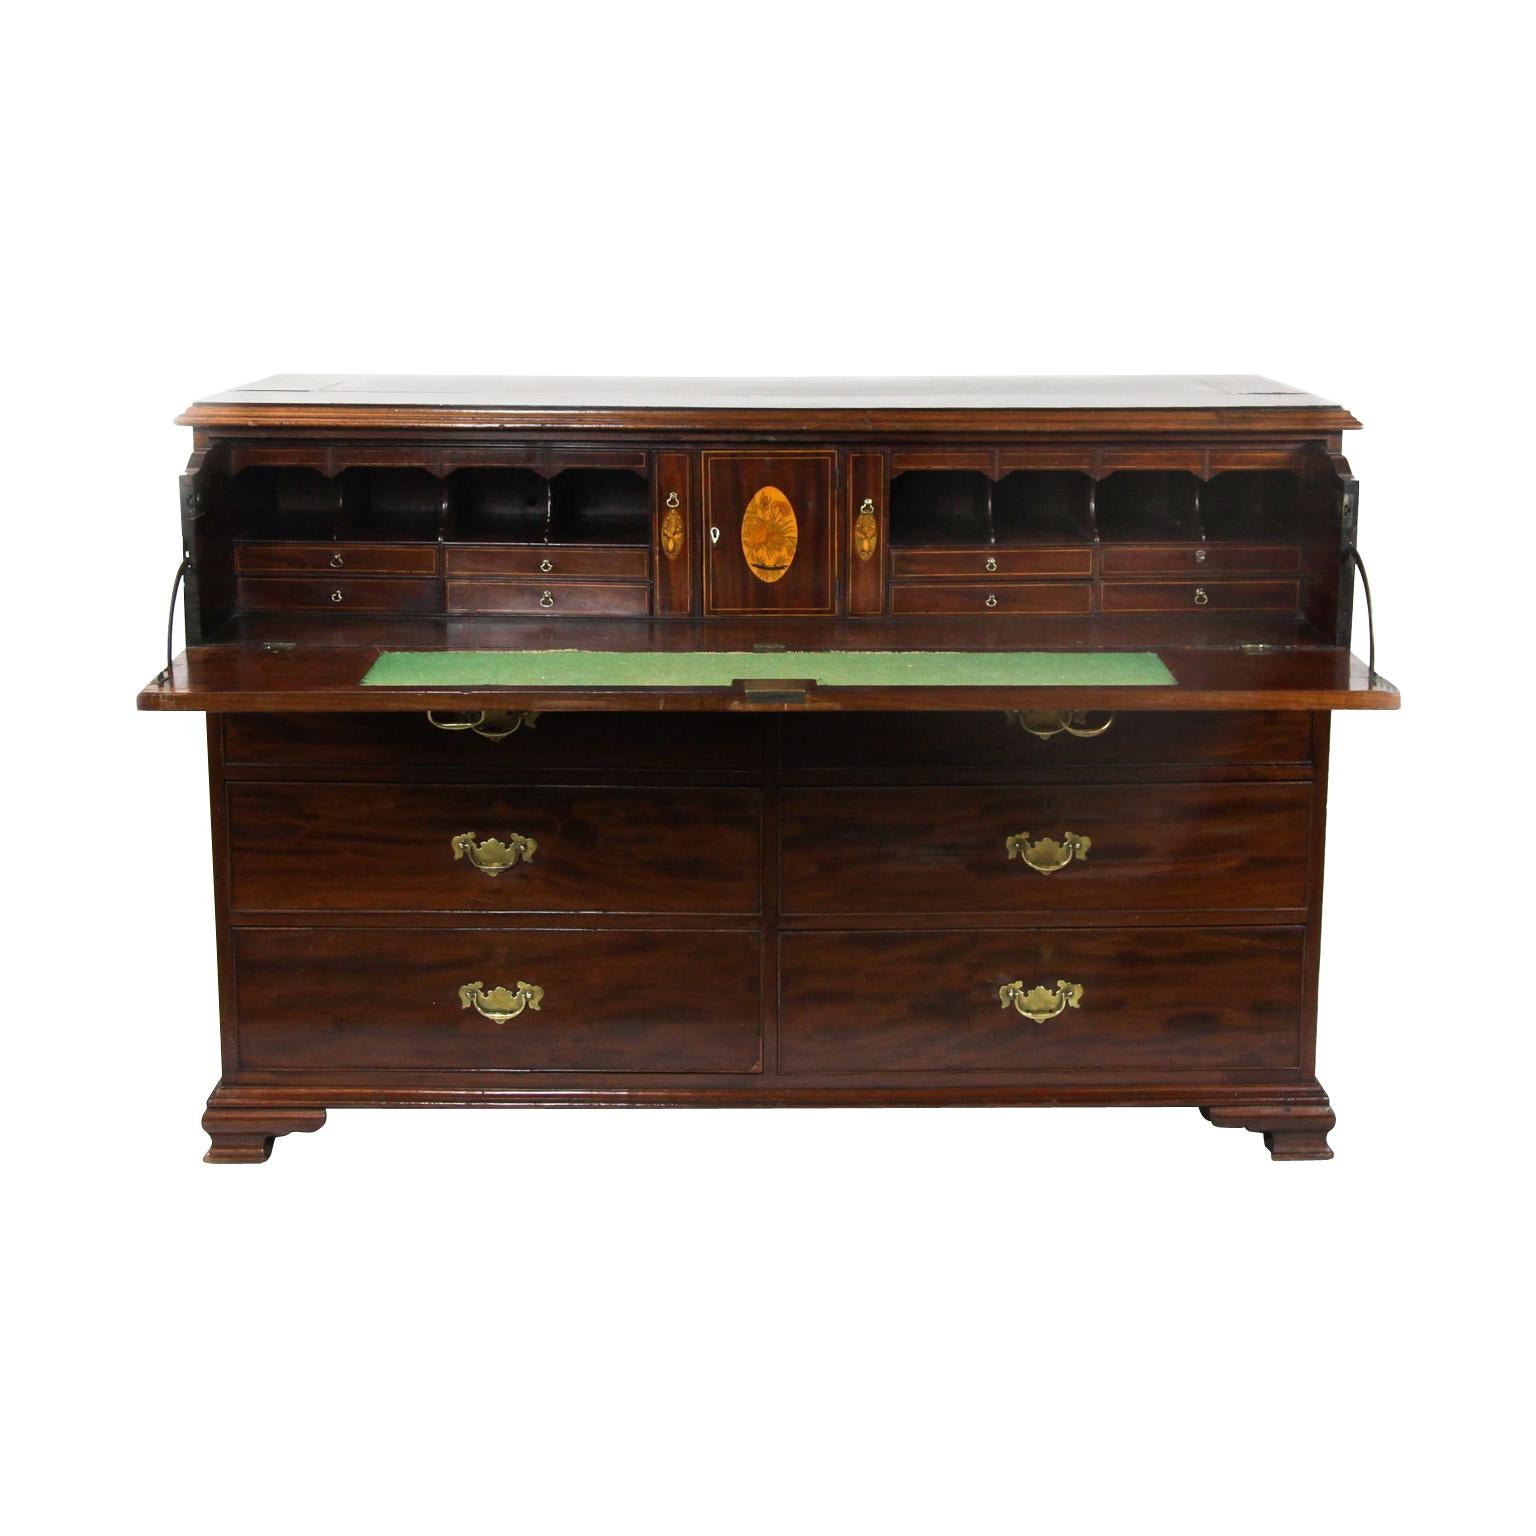 Early 19th Century English Fall Front Butler's Desk